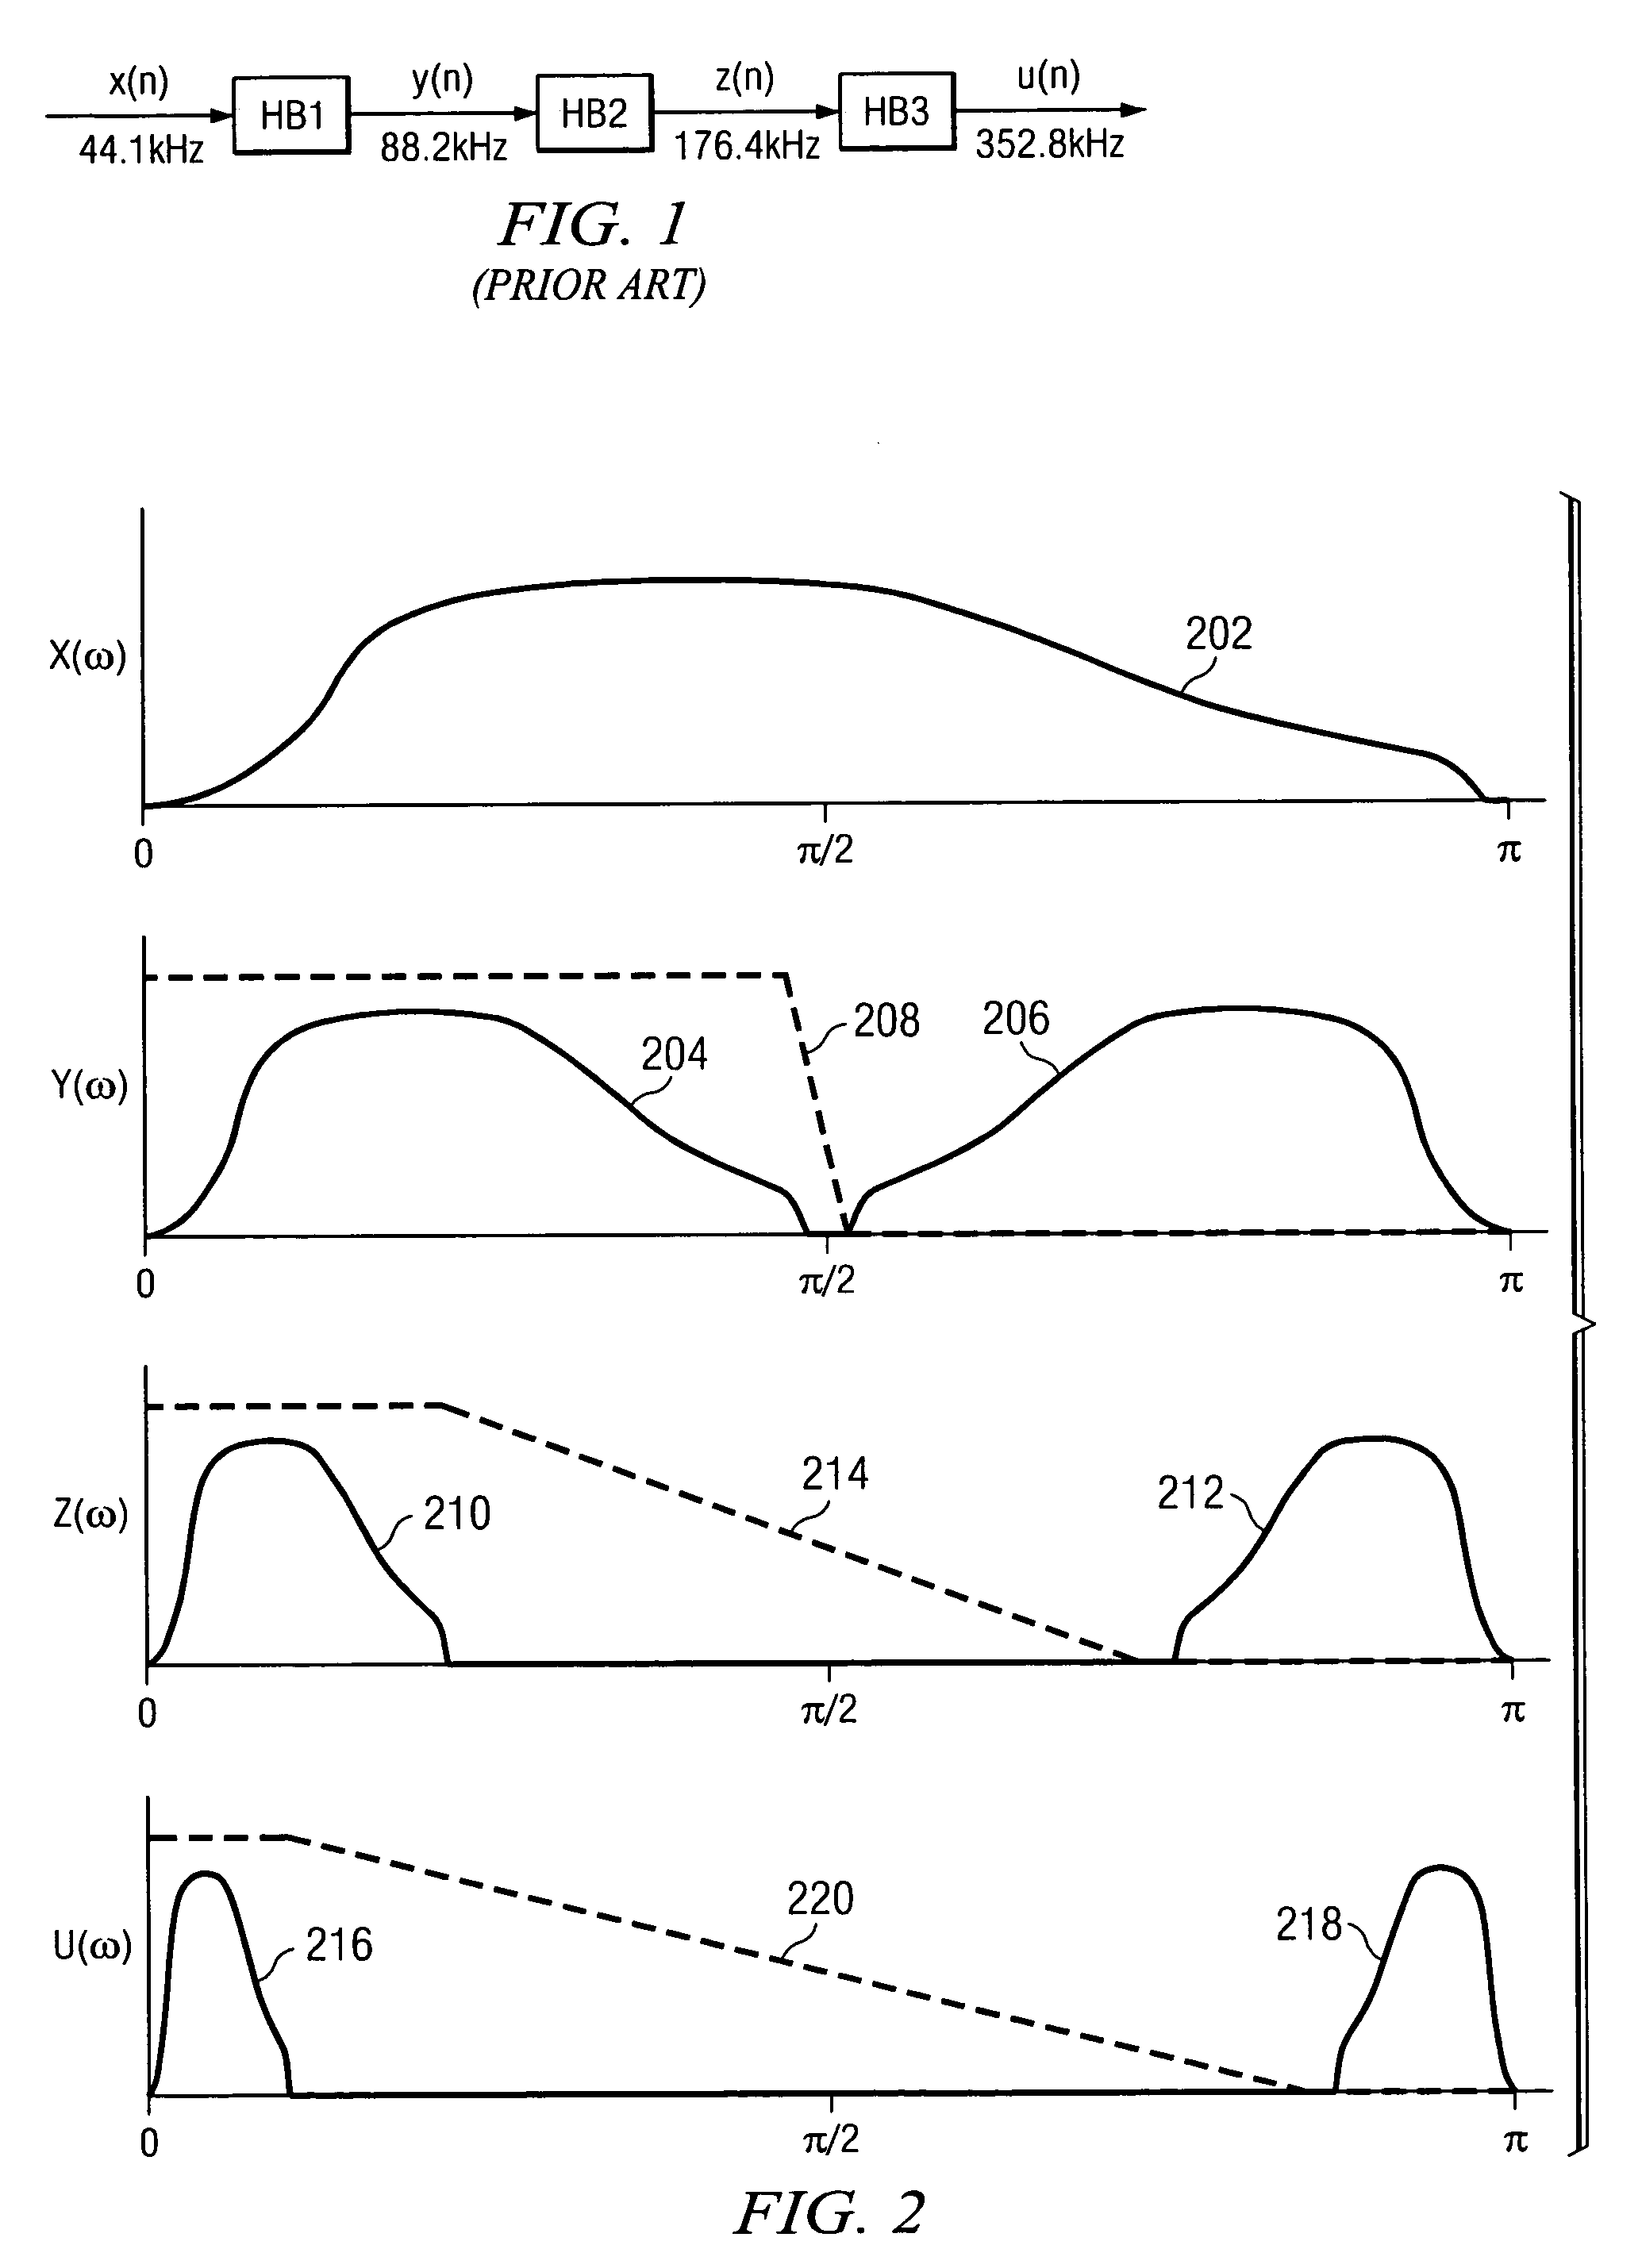 Method and apparatus for efficient multi-stage FIR filters